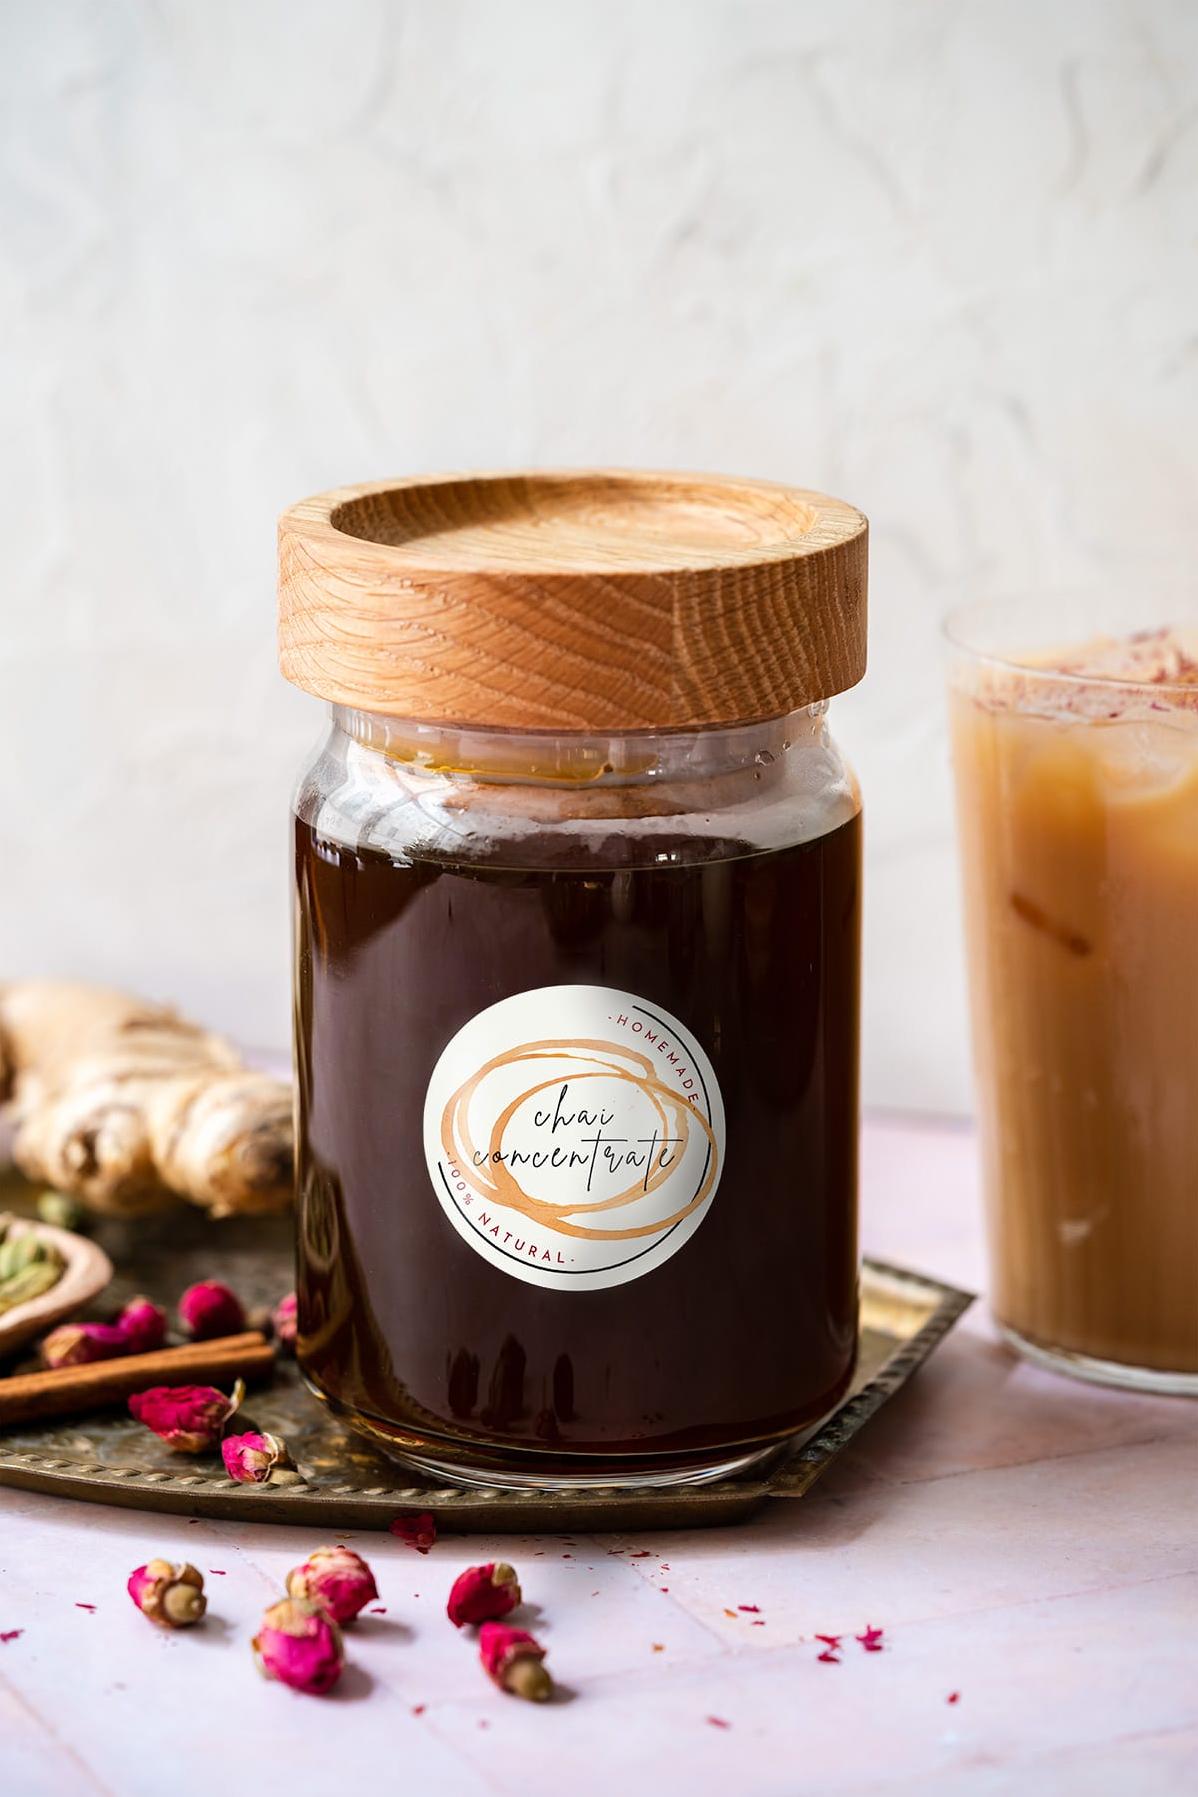  Get your spices ready and indulge in a cup of masala chai perfection.